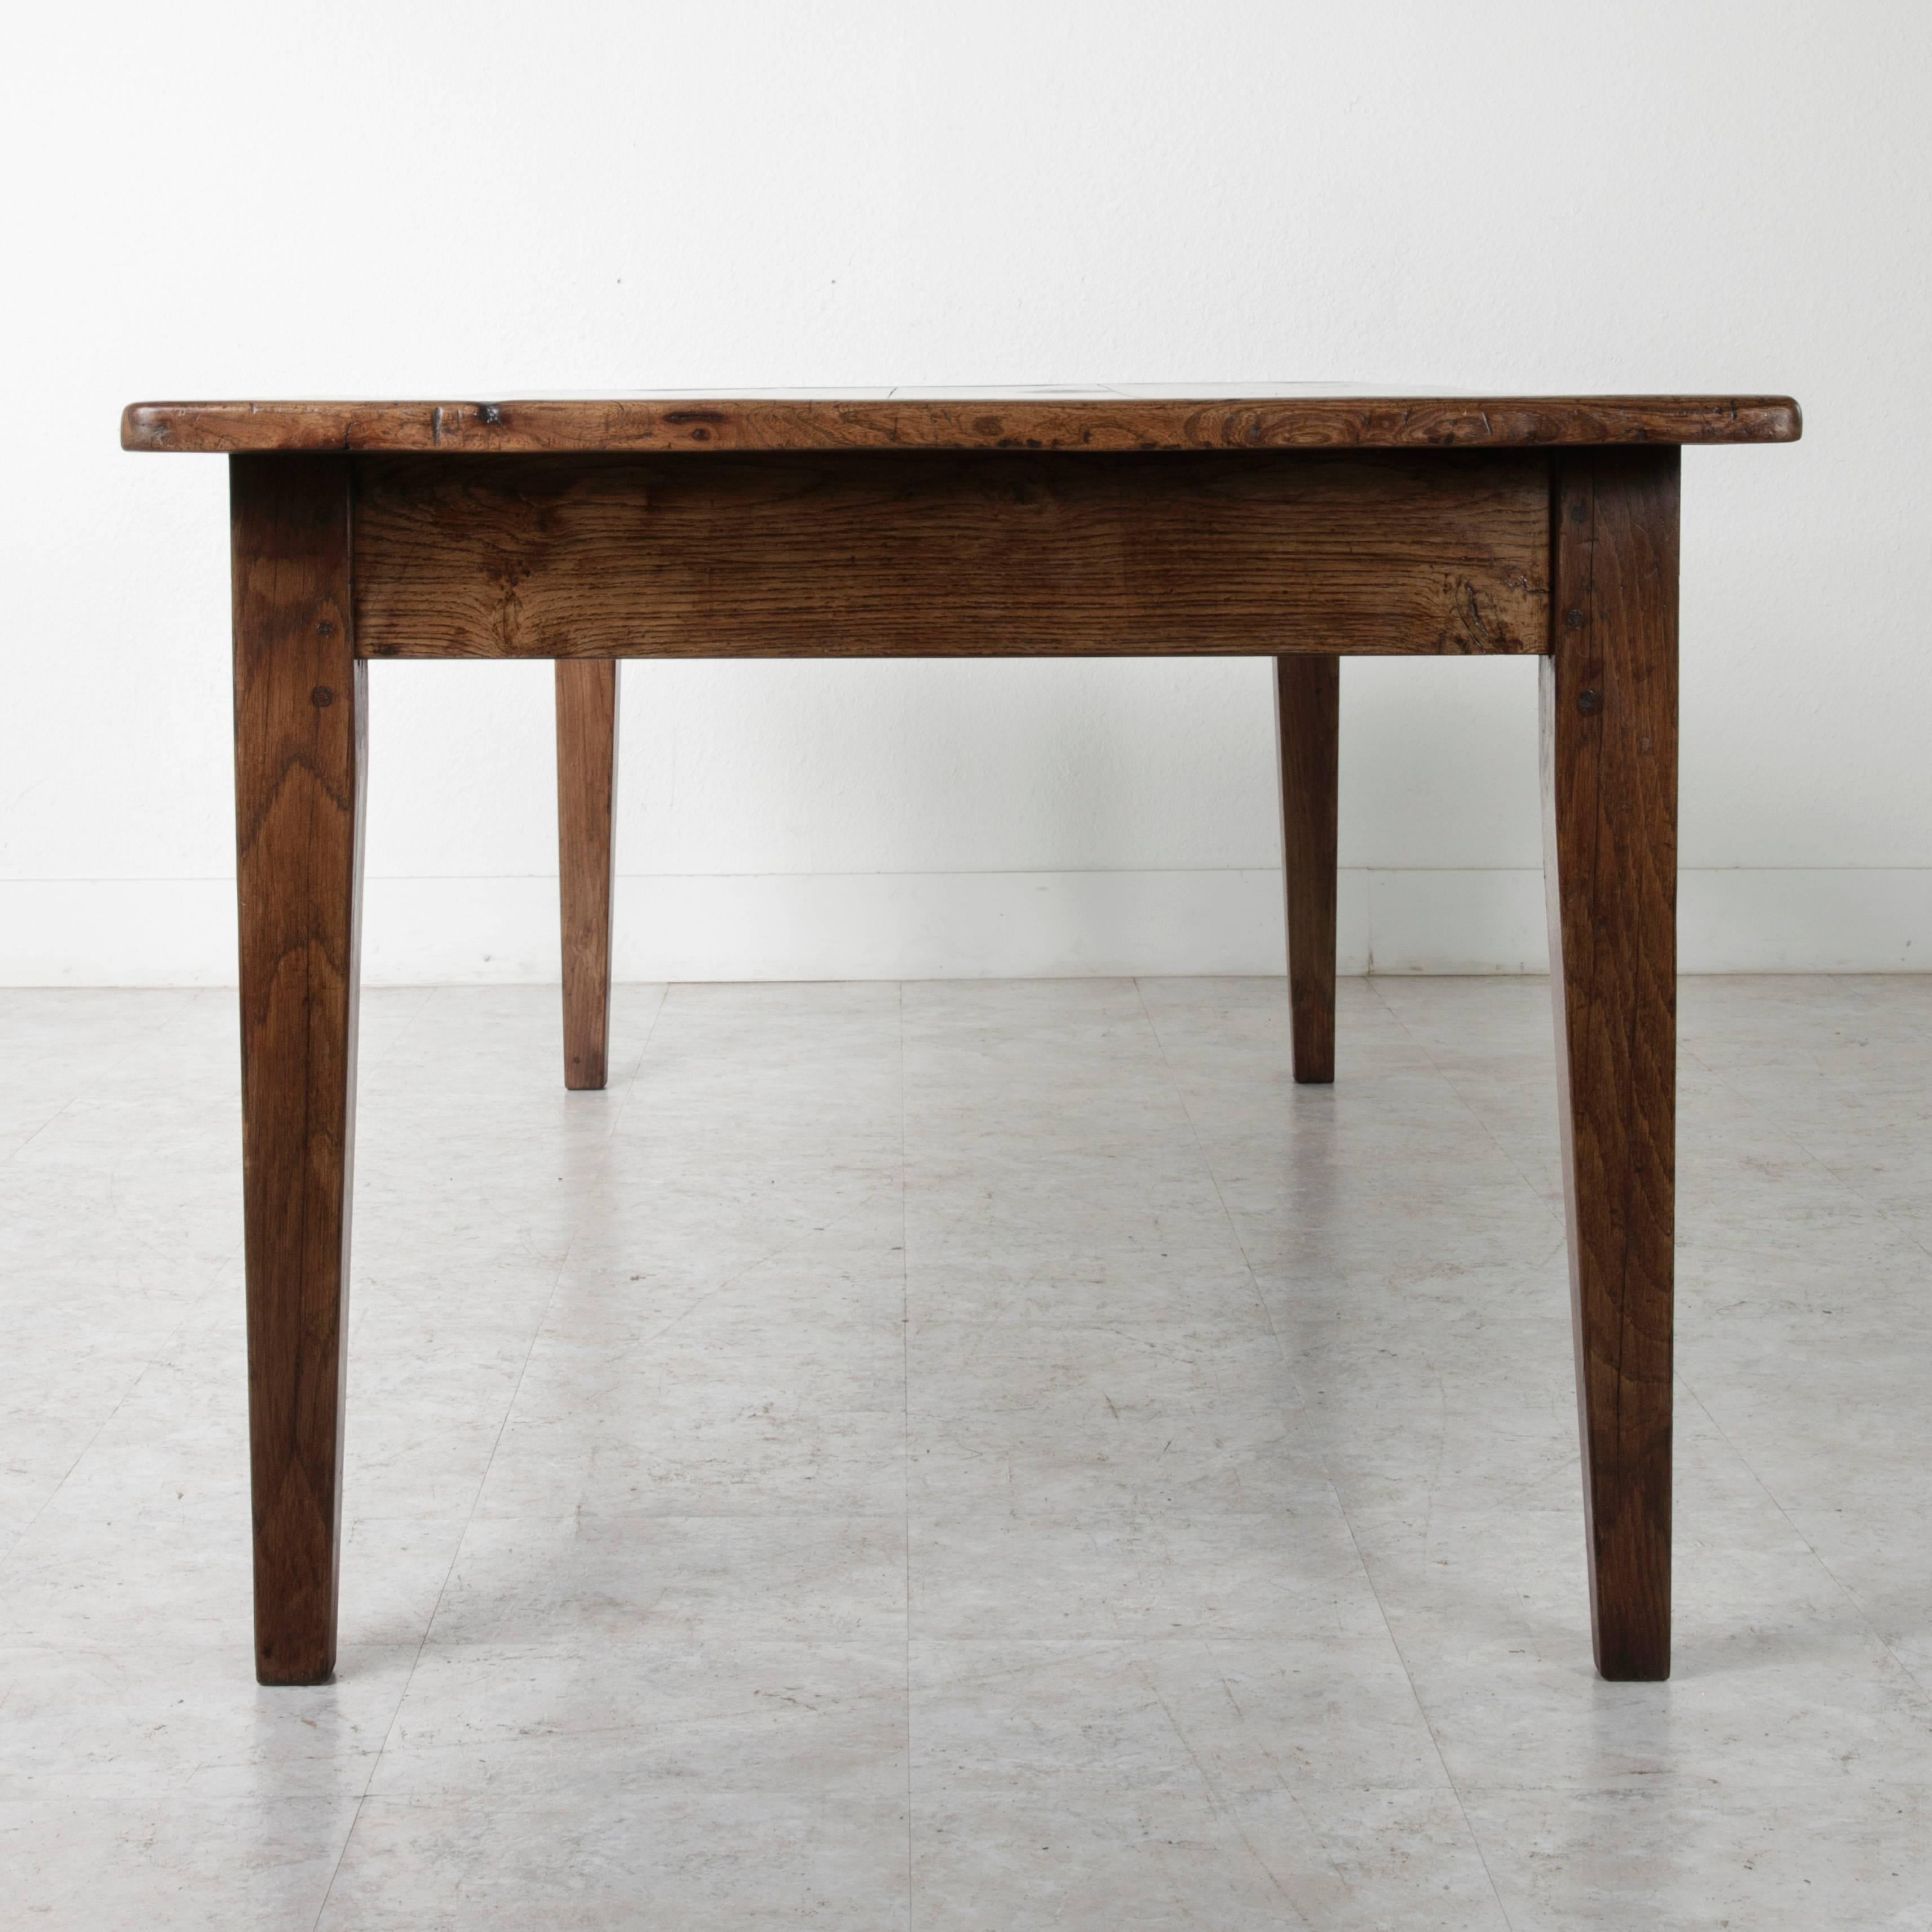 This artisan made farm table's base is made of solid hand pegged French oak, while its top is of solid elm. A simple drawer on one side was designed to hold bread knives at the table, while the other side holds a pull out cutting board. This piece's